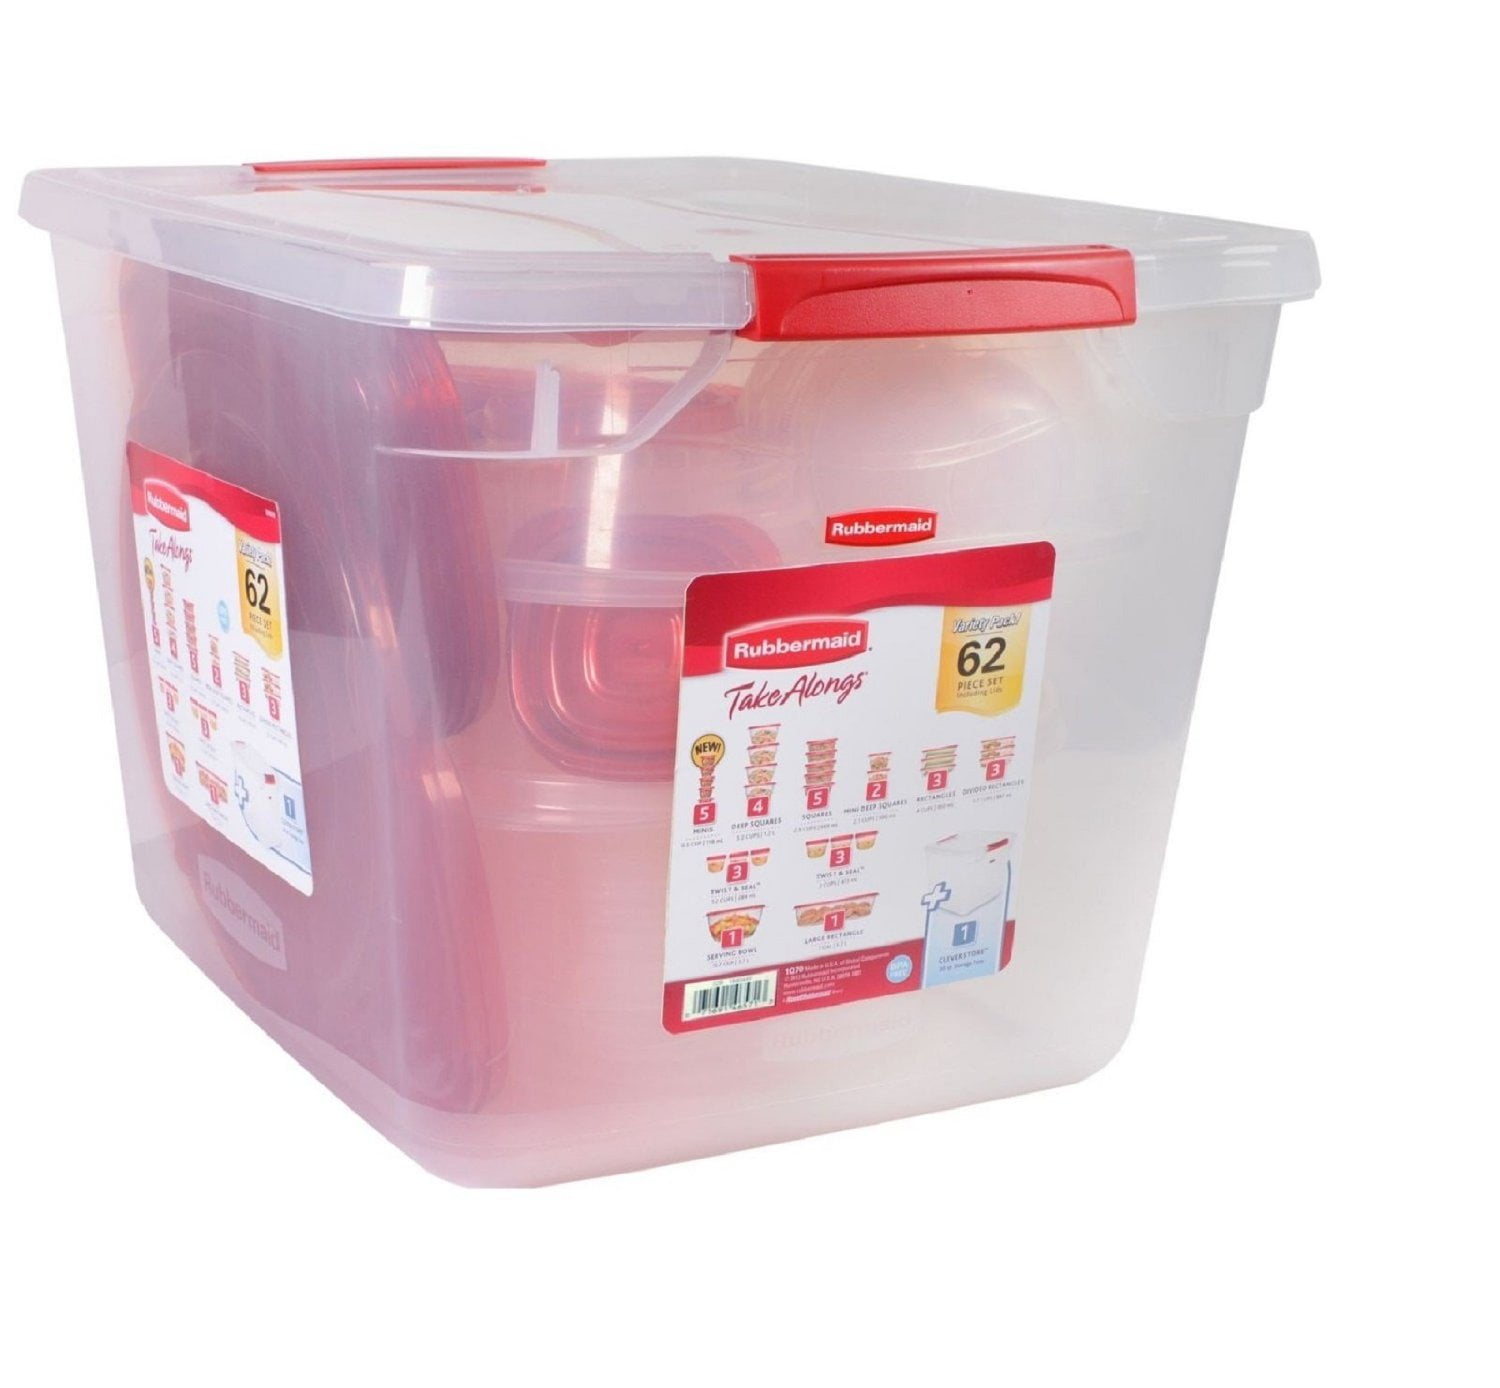 Rubbermaid TakeAlongs Containter Variety Pack 62 Piece Set Including Lids 